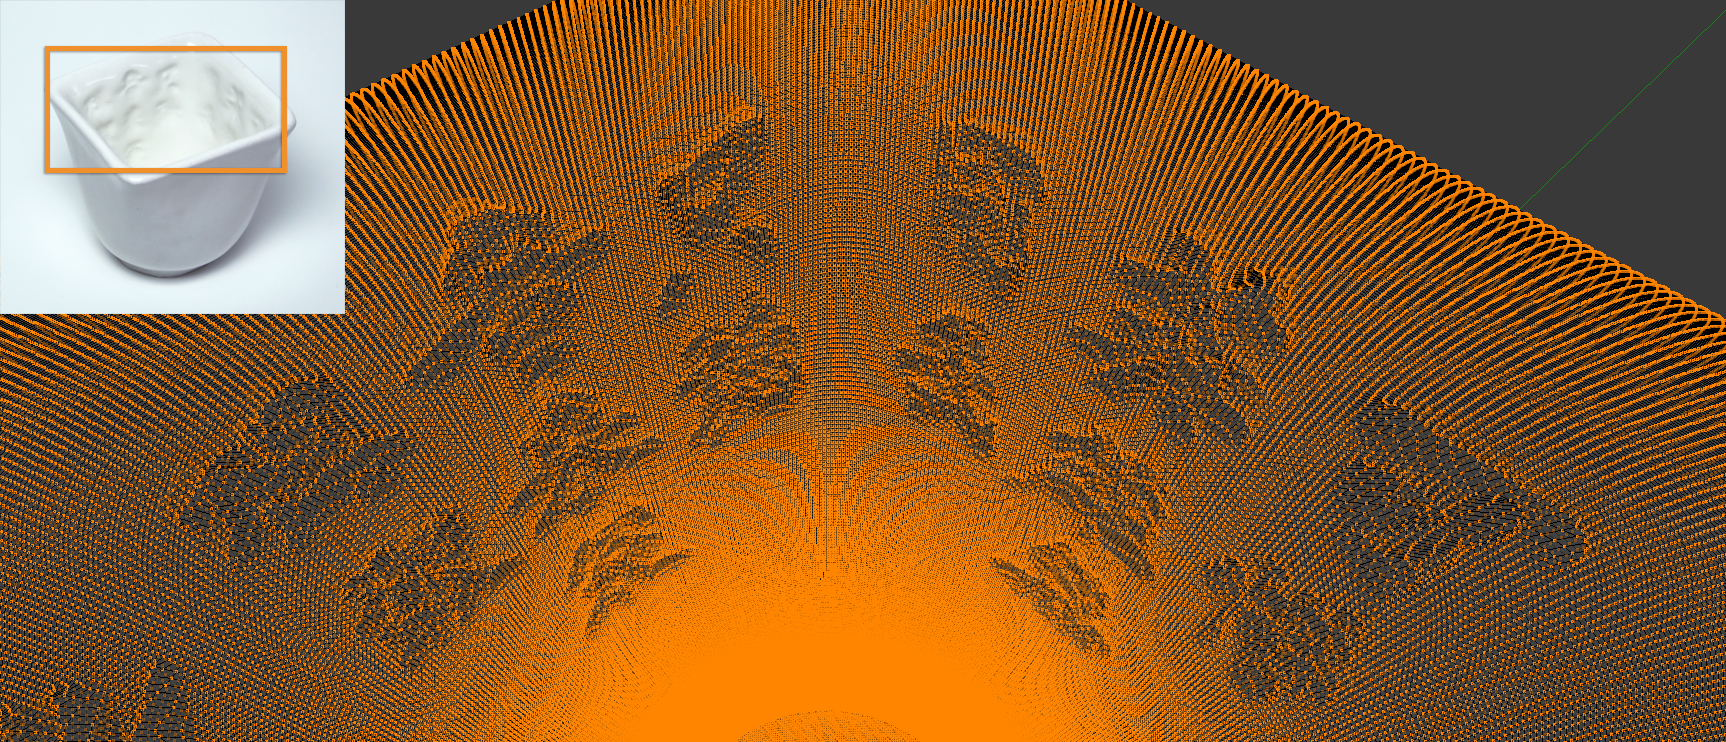 Point cloud of tea cup